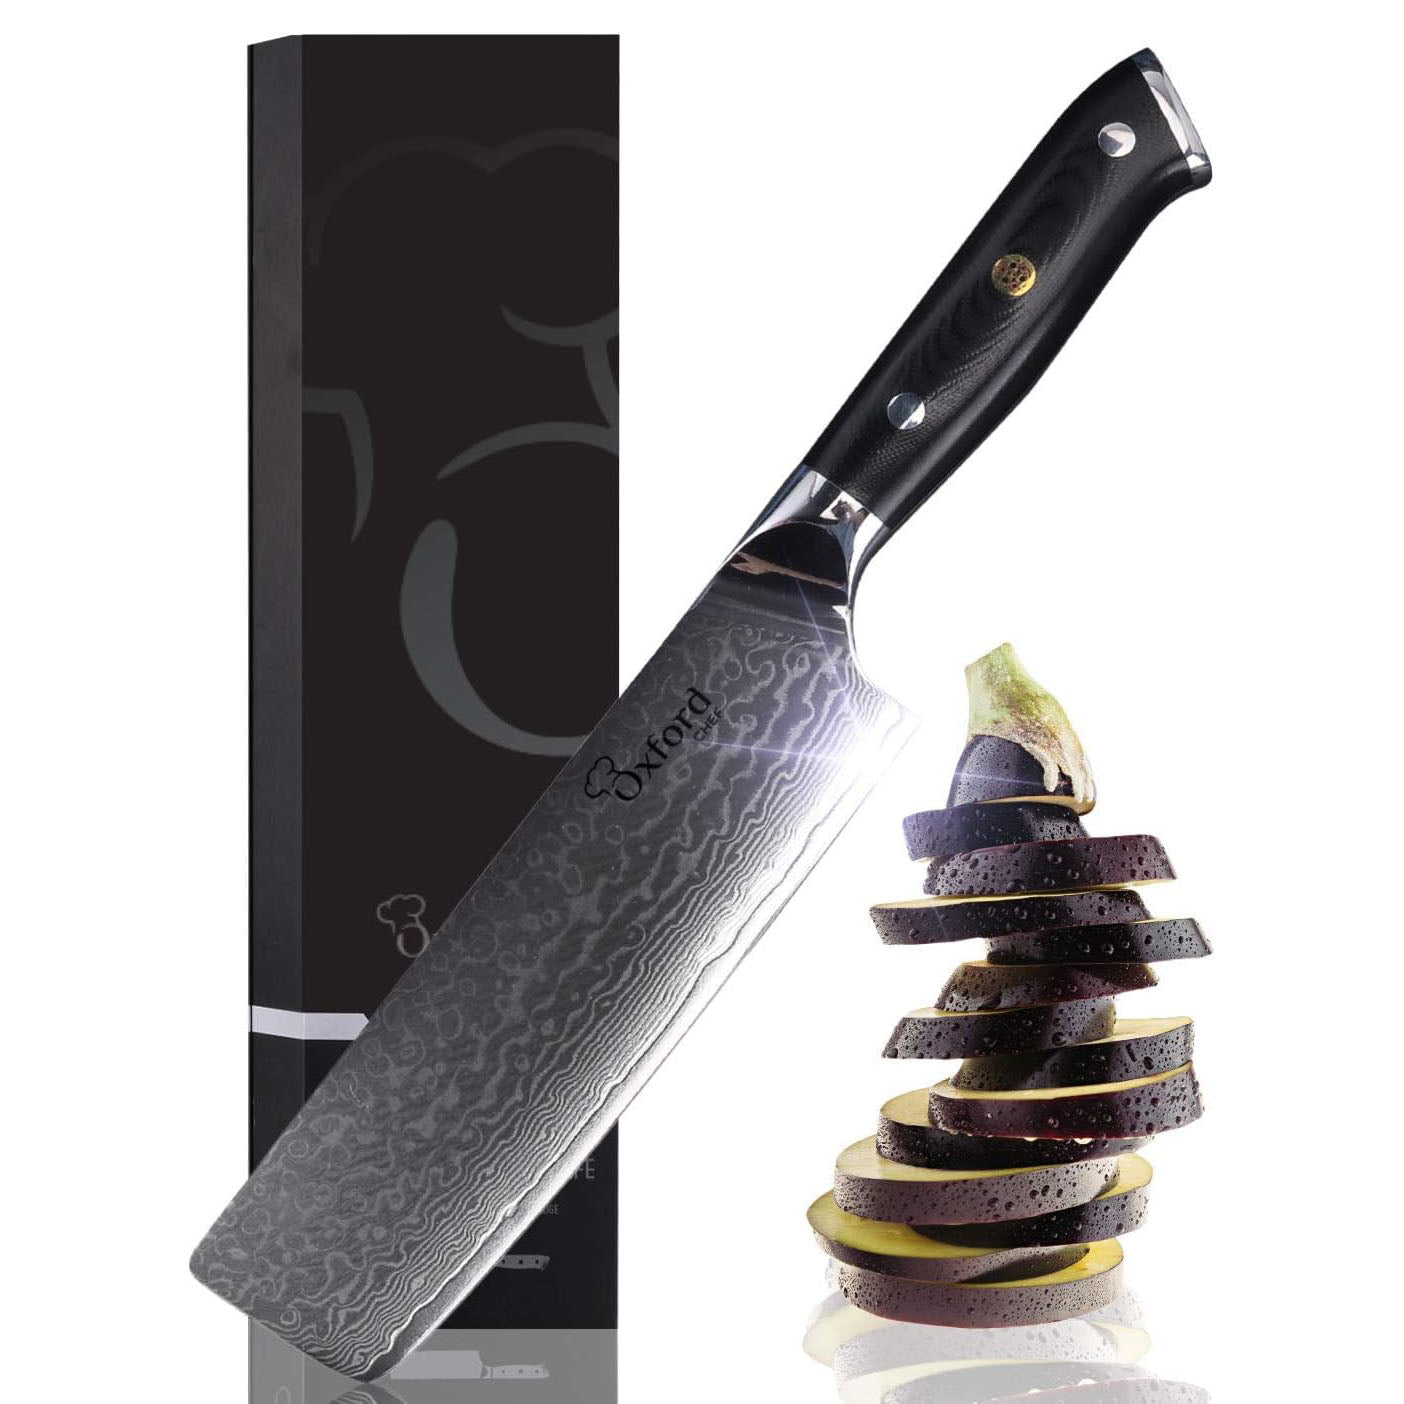 KD Japanese 67 Layer Damascus VG10 Steel Kitchen Chef's Knife with Gift Box